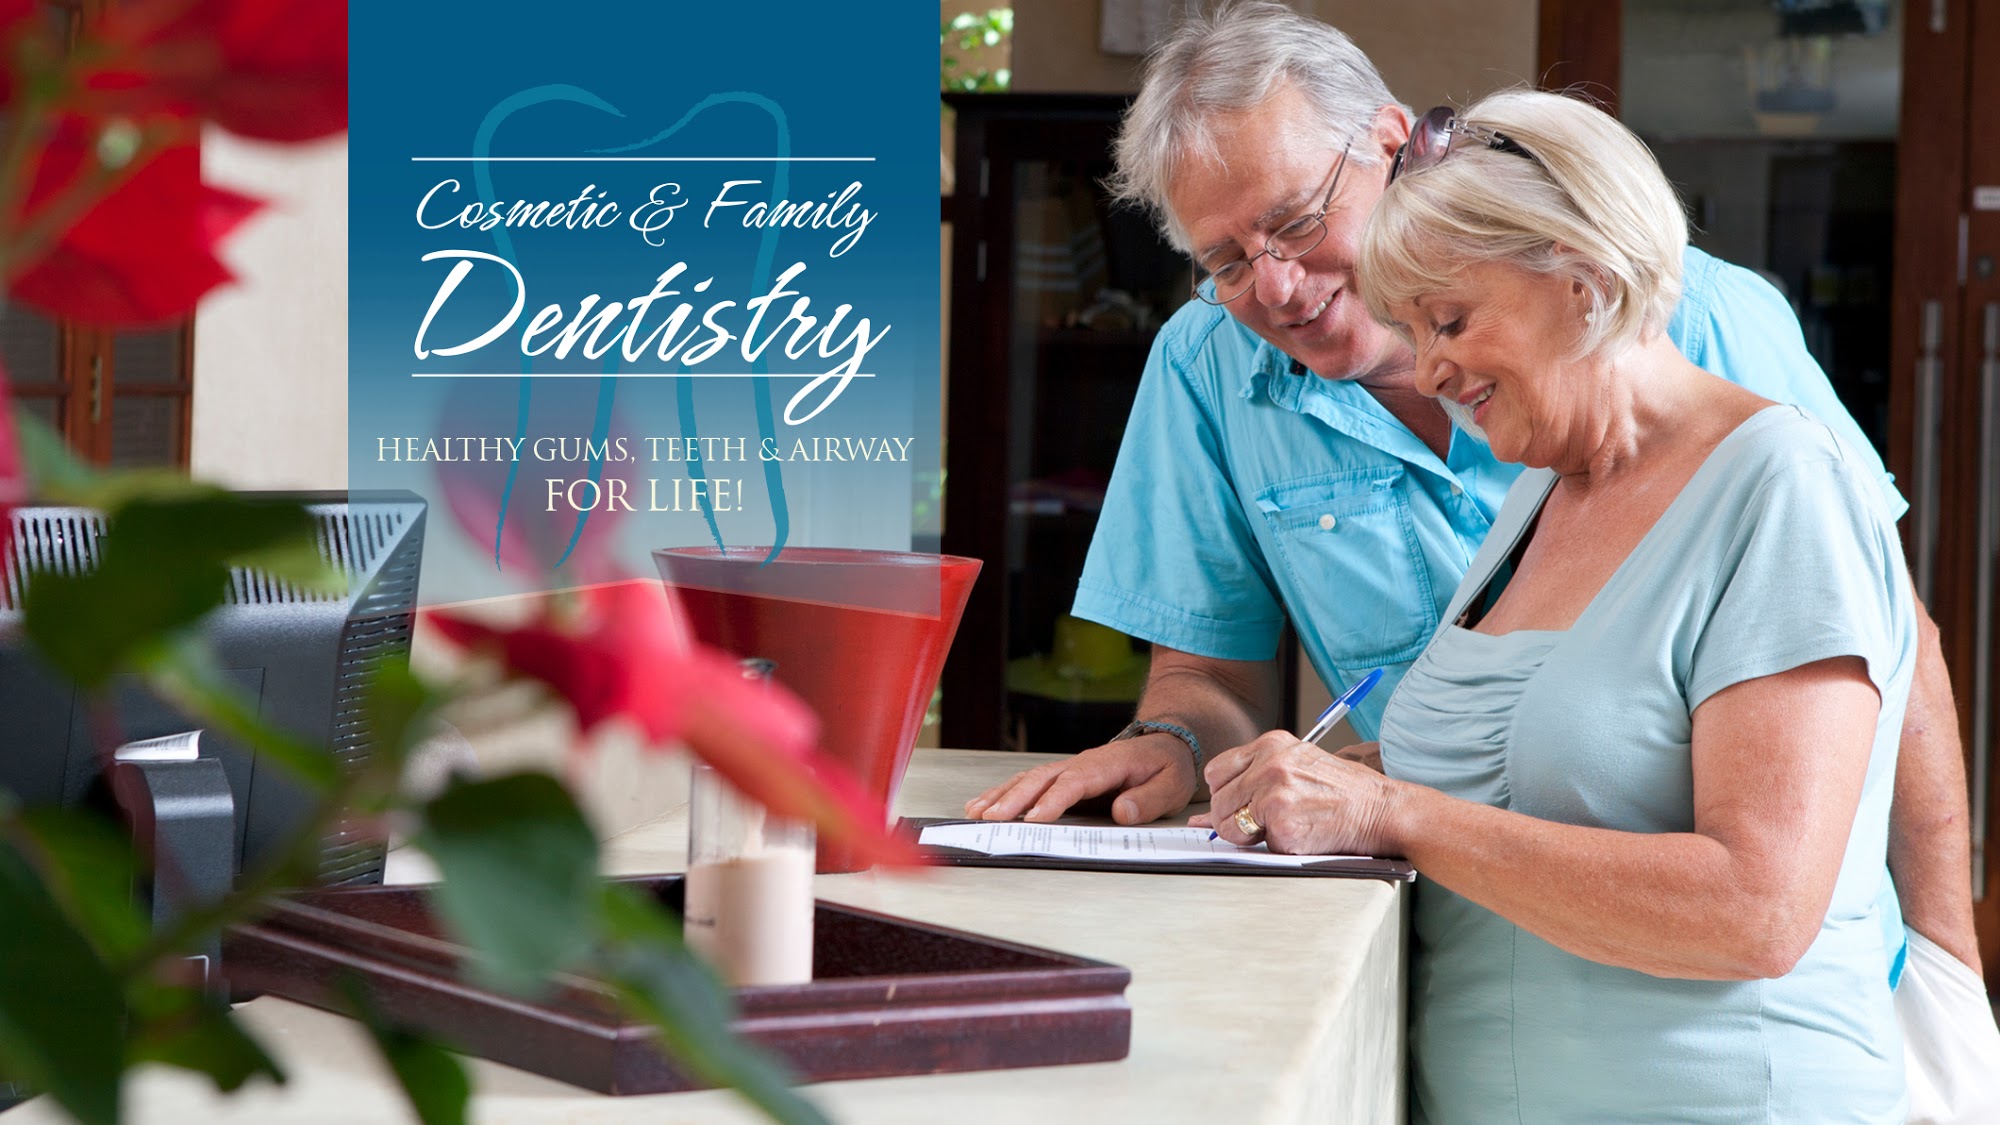 Cosmetic & Family Dentistry of Weatherford